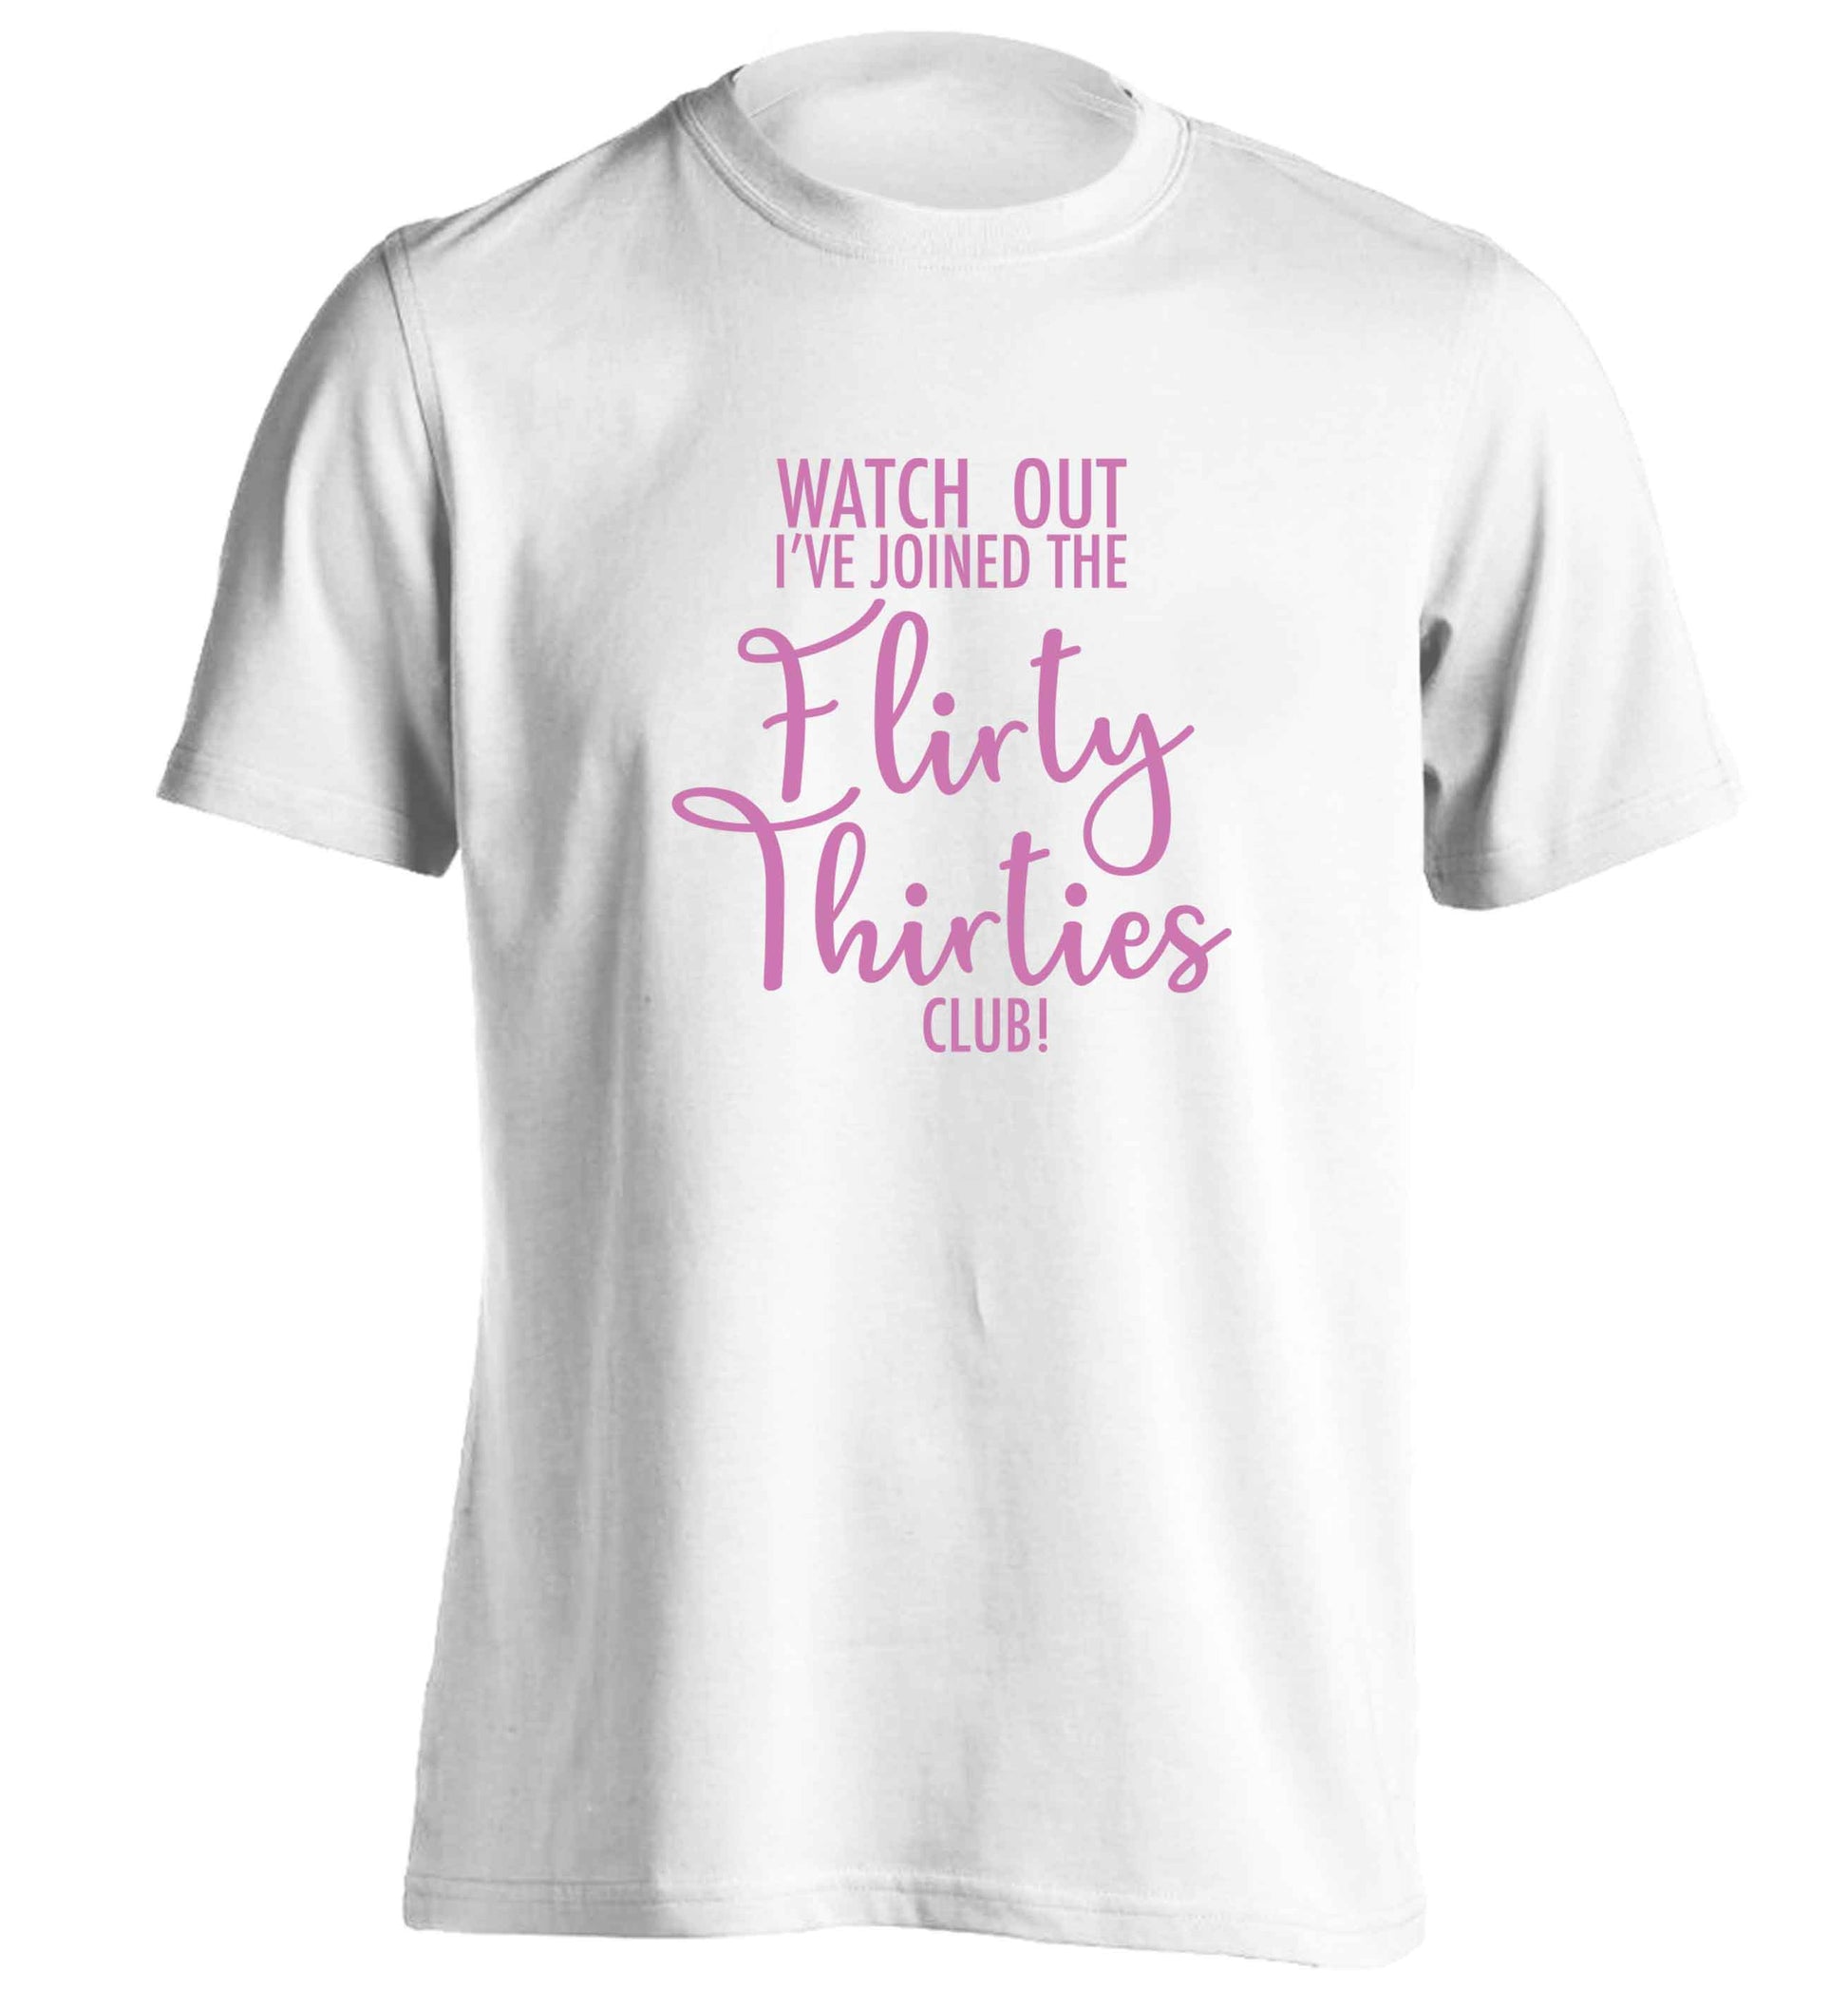 Watch out I've joined the flirty thirties club adults unisex white Tshirt 2XL